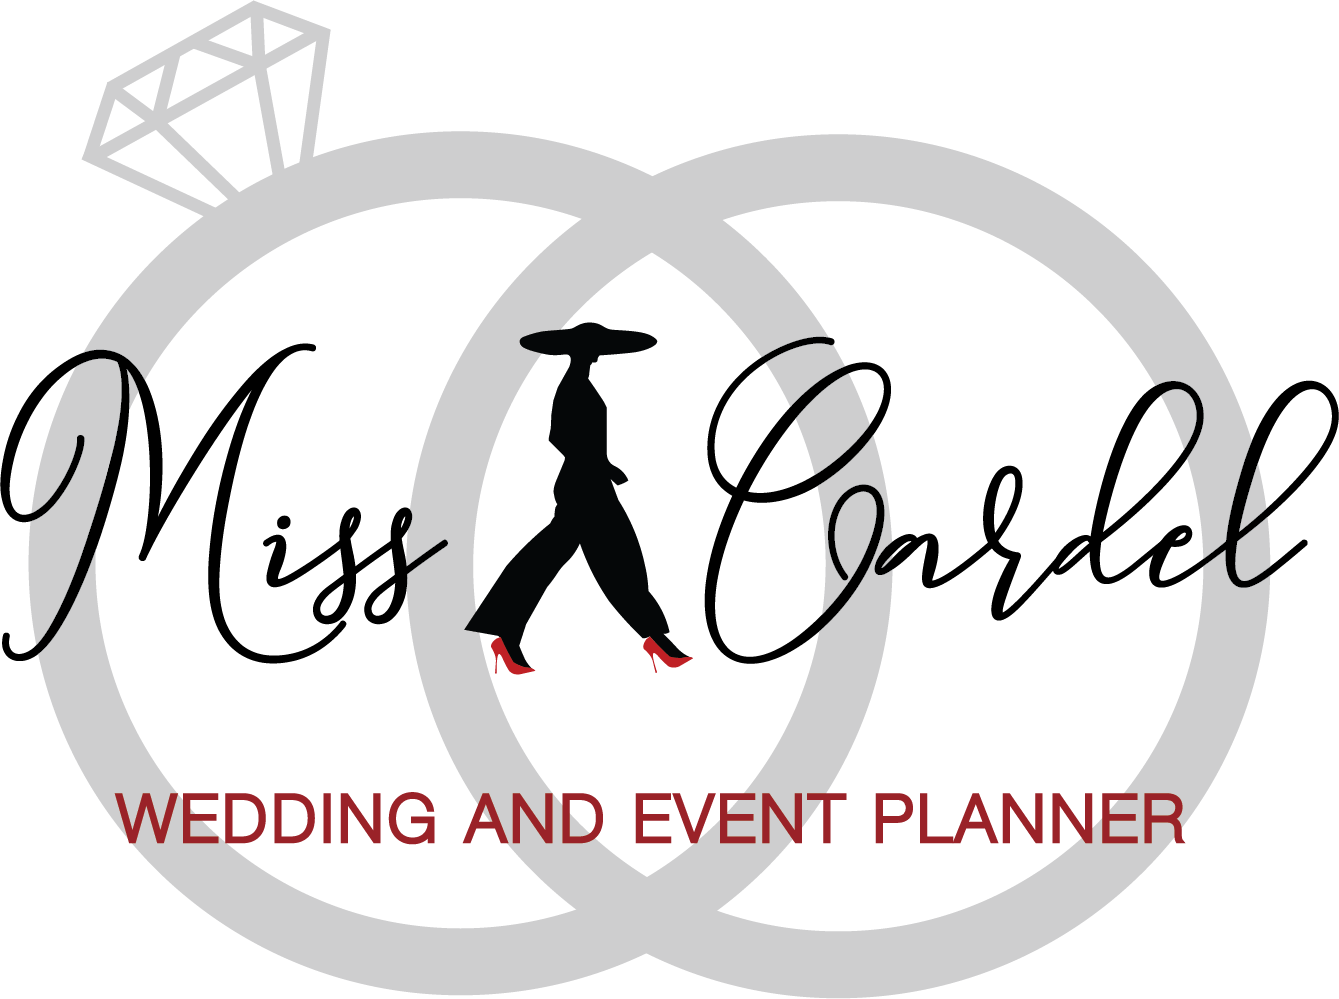 Ms. Cardel Wedding and Event Planner